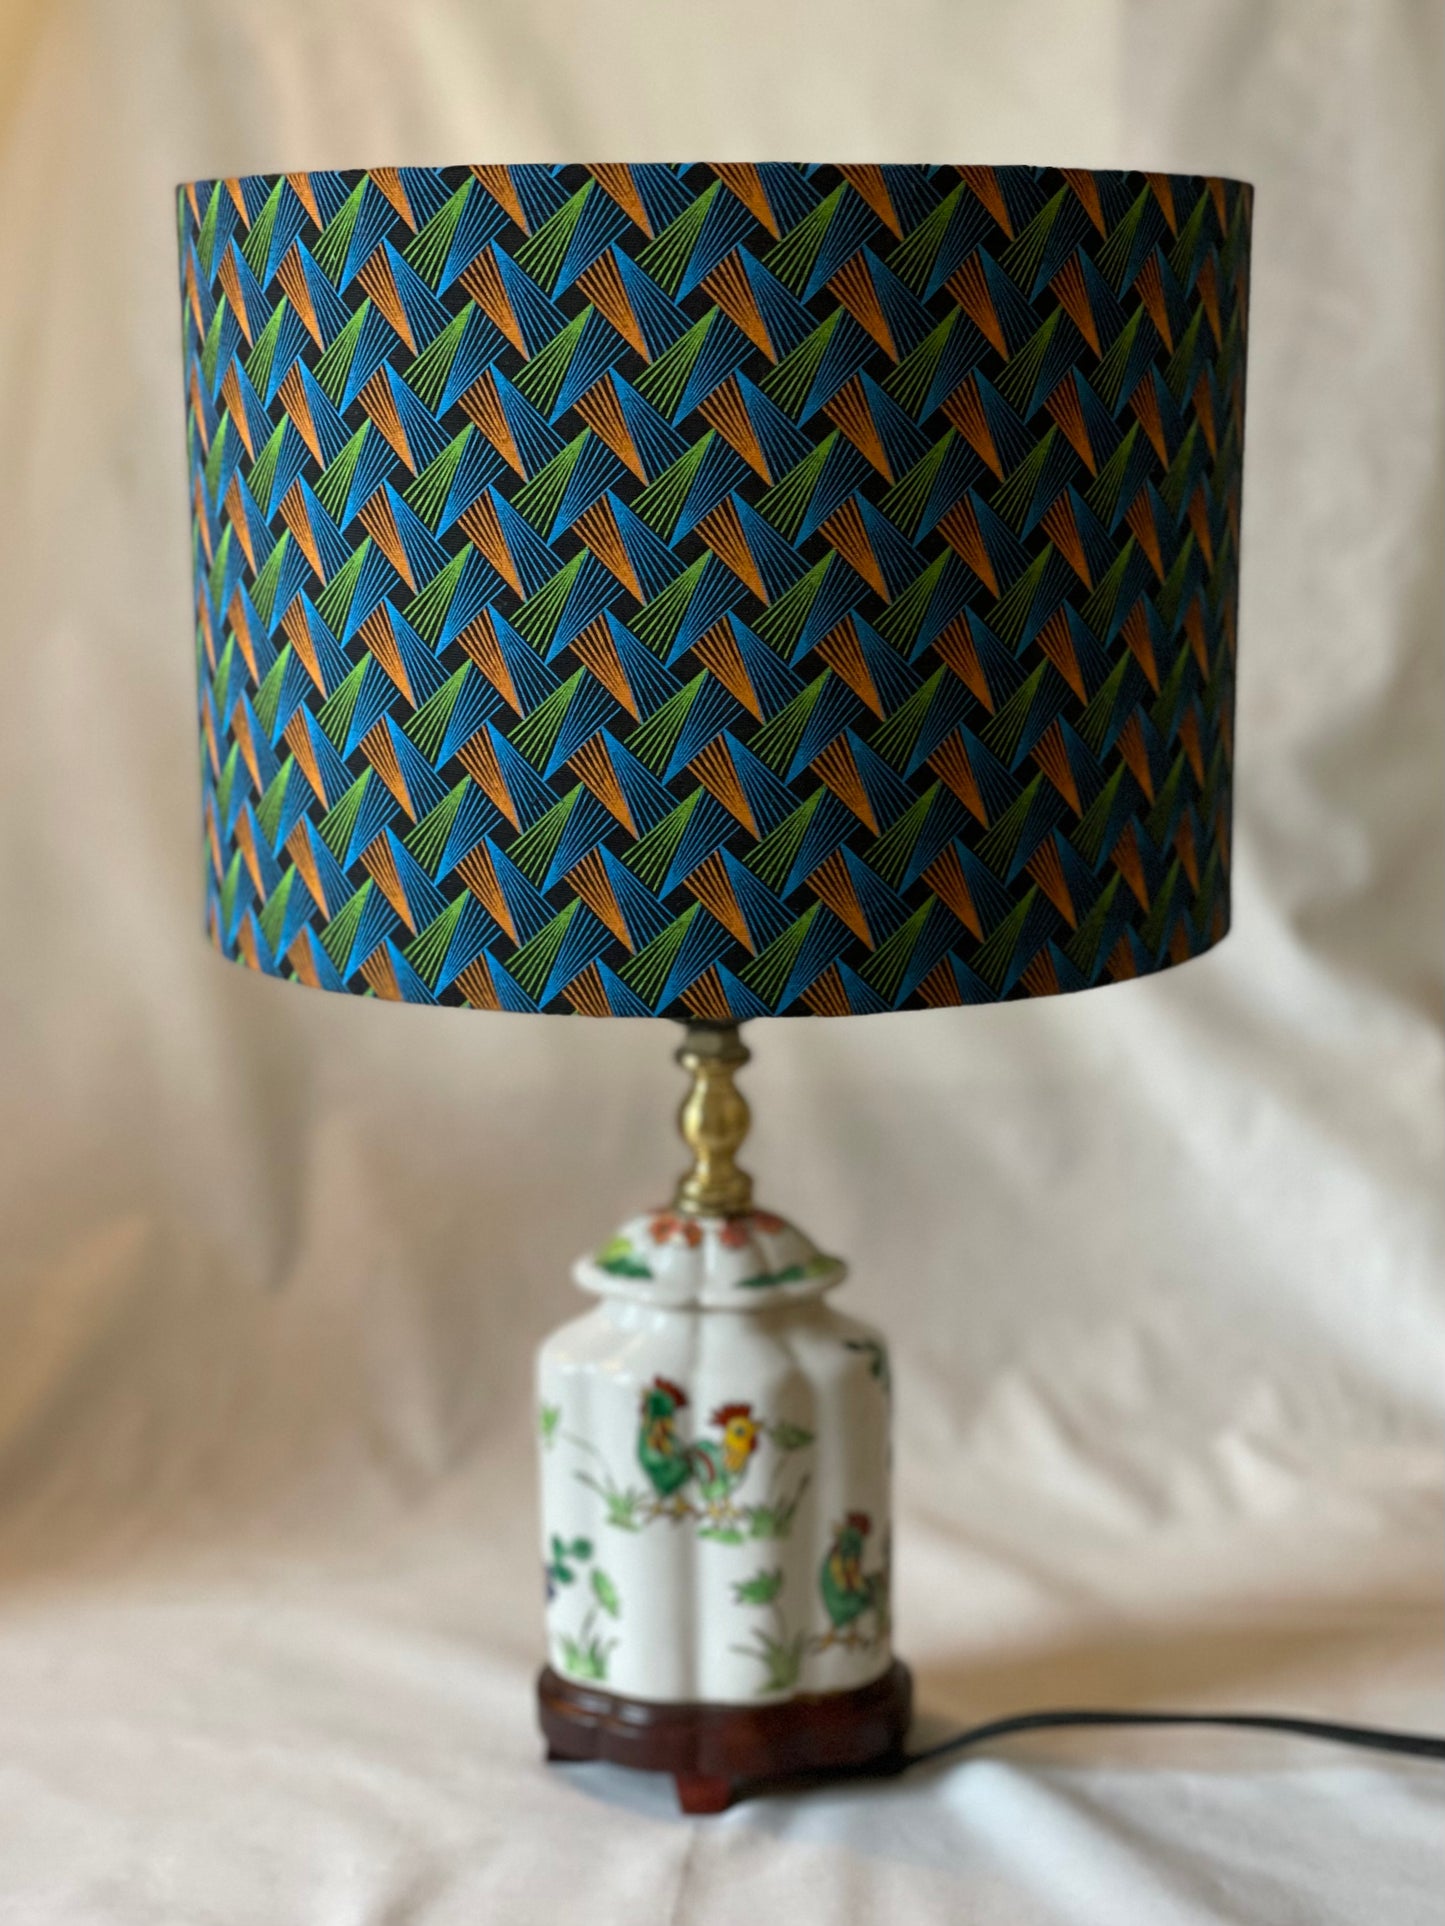 10 inch Drum Lampshade. Dynamic South African Shwe Shwe Print- Blue, Orange, Green and Navy.